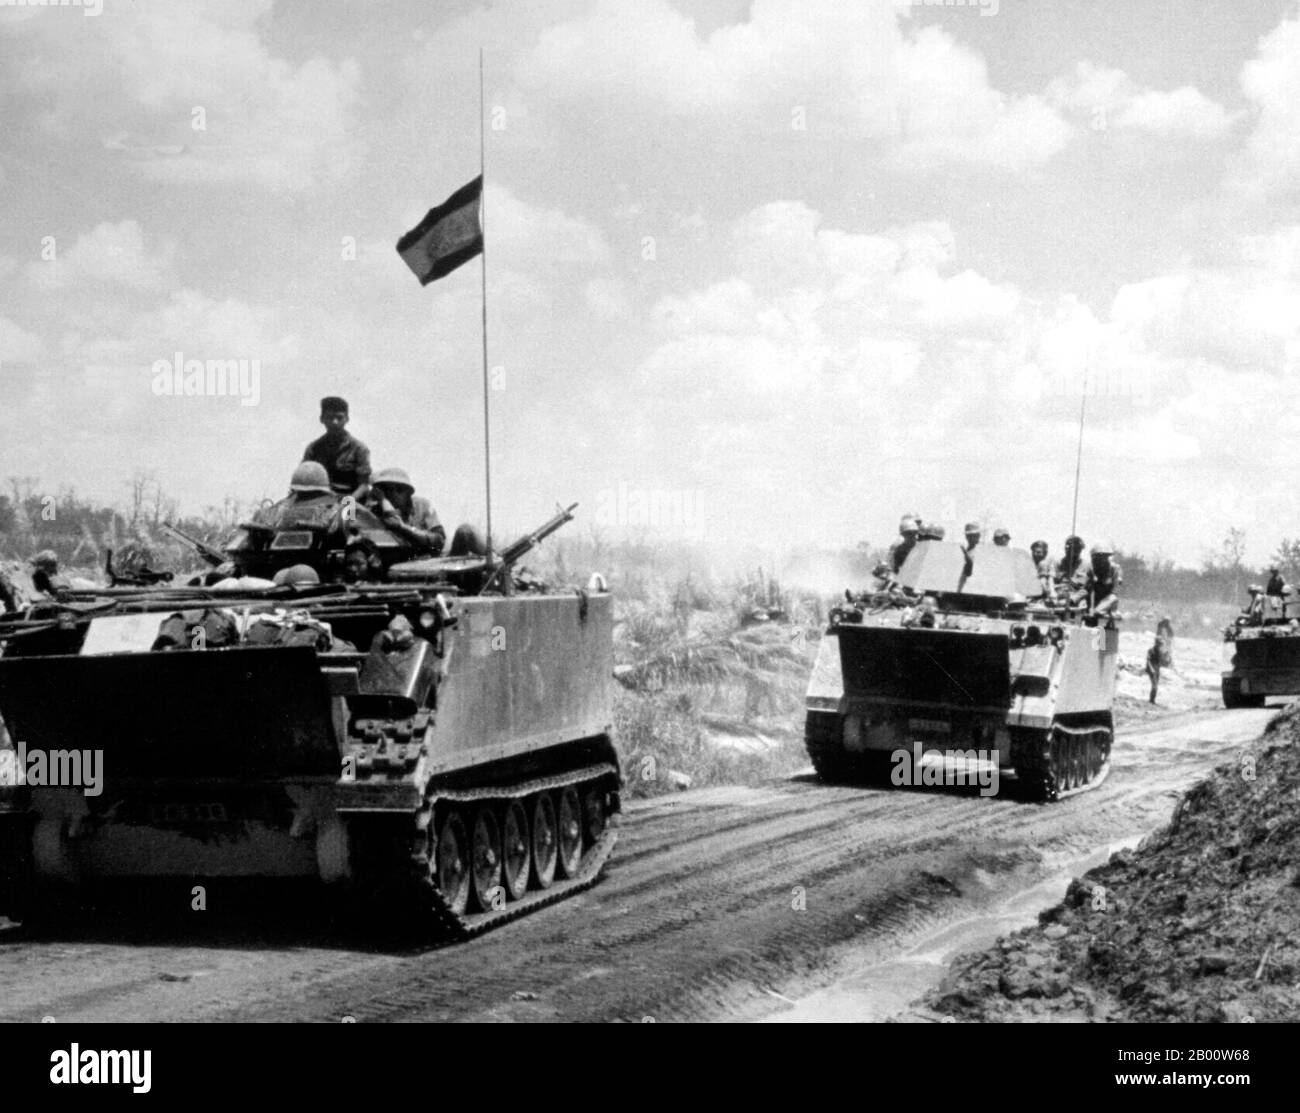 Cambodia: Forces of the Army of the Republic of Vietnam (ARVN) invade Cambodia with US backing, 1970.  The Cambodian Campaign (also known as the Cambodian Incursion) was a series of military operations conducted in eastern Cambodia during mid-1970 by the United States (U.S.) and the Republic of Vietnam (South Vietnam) during the Vietnam War. A total of 13 major operations were conducted by the Army of the Republic of Vietnam (ARVN) between 29 April and 22 July and by U.S. forces between 1 May and 30 June. Stock Photo